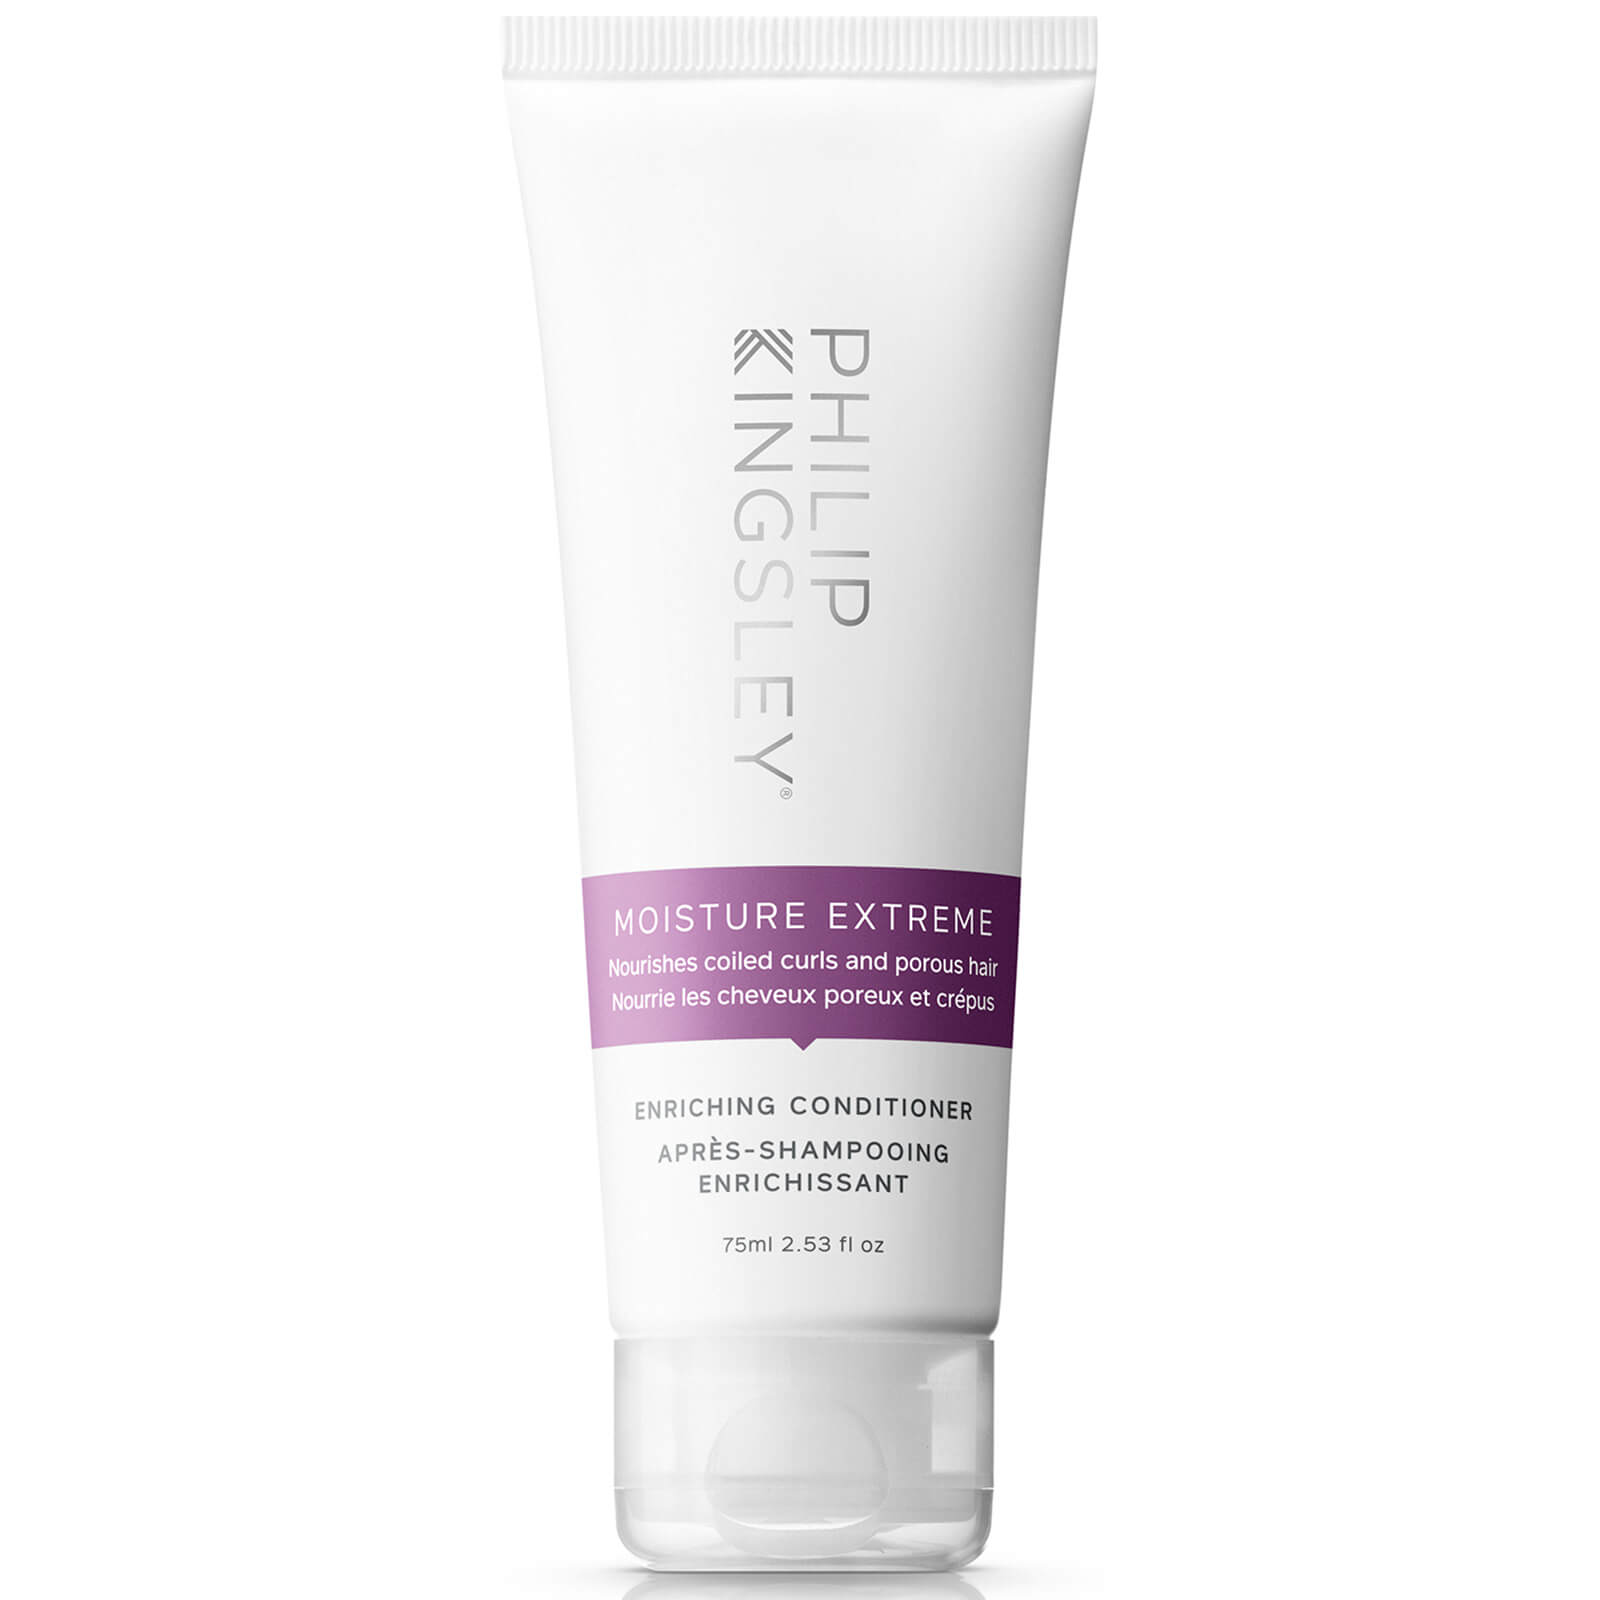 Photos - Hair Product Philip Kingsley Moisture Extreme Enriching Conditioner 75ml 